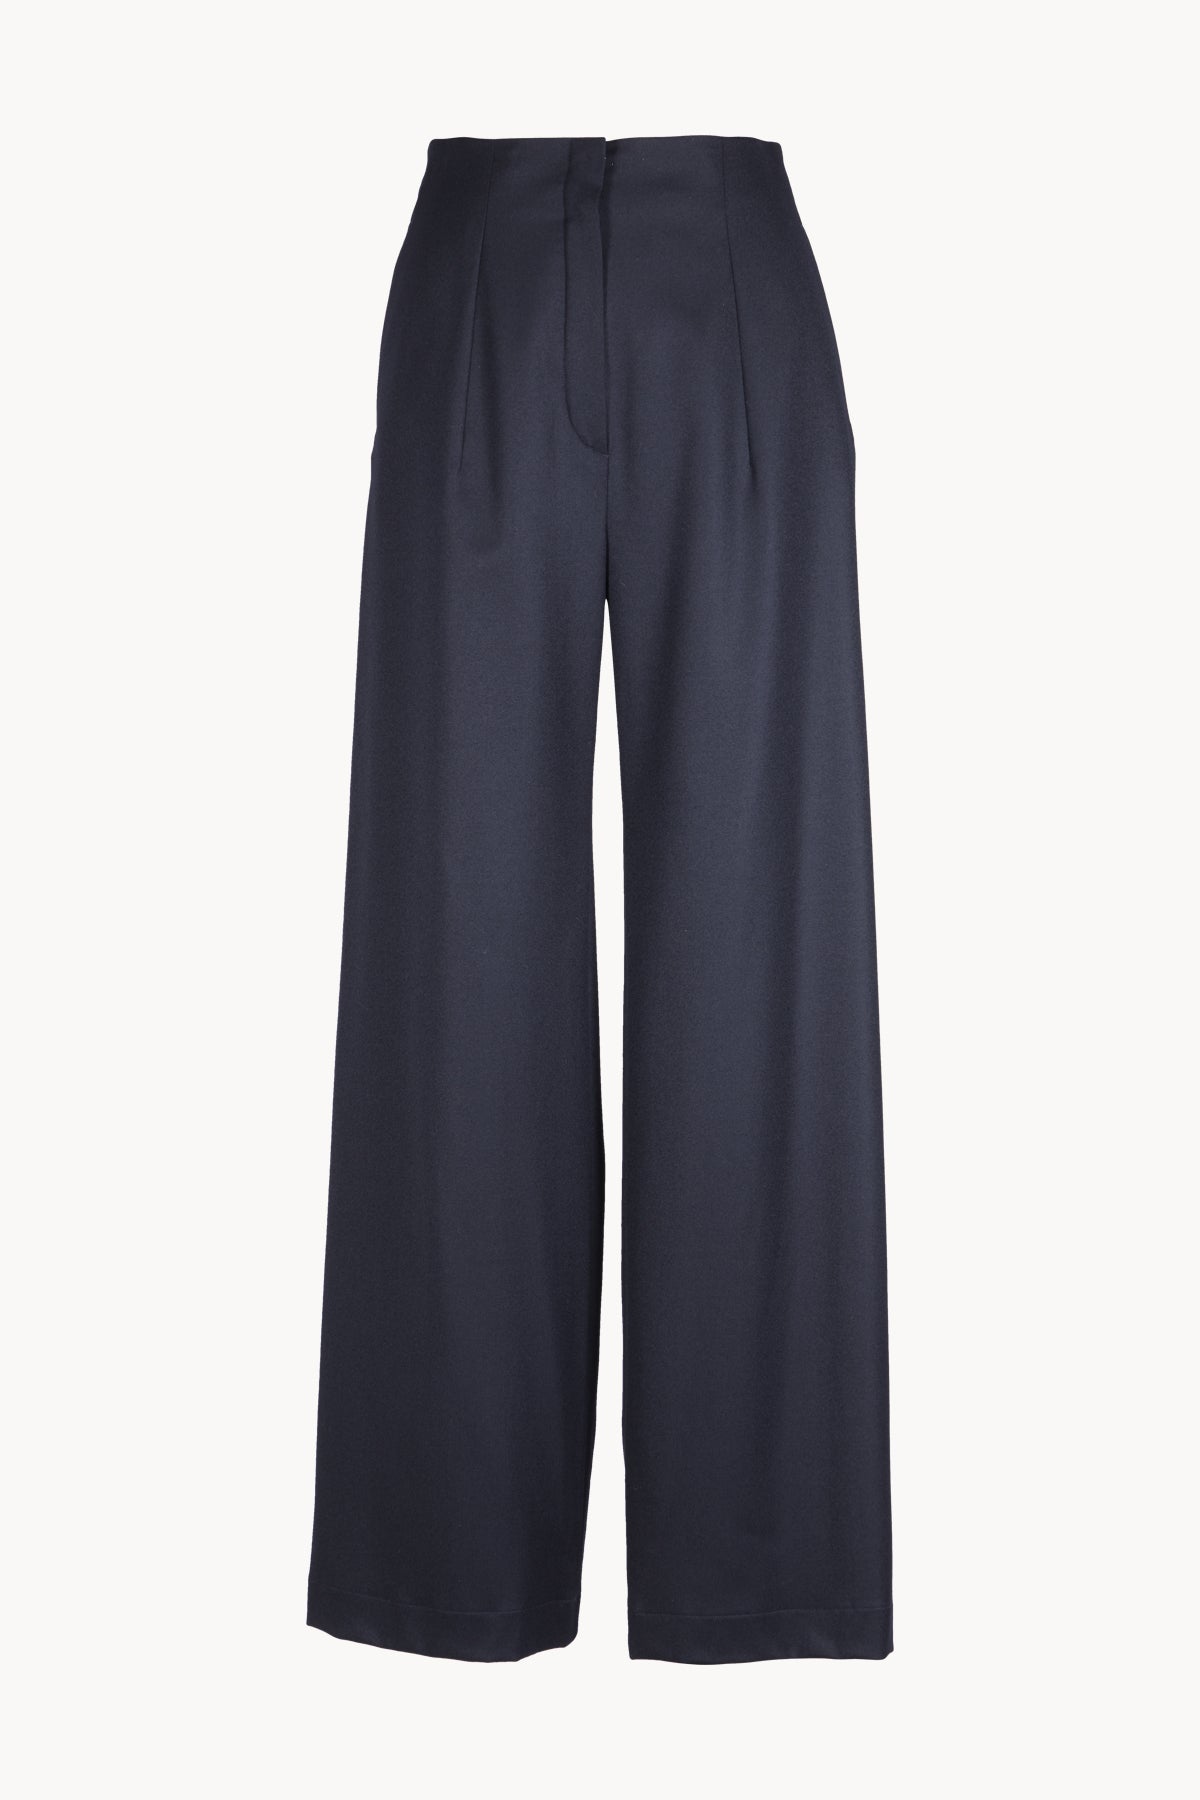 Caro pants in pure new wool